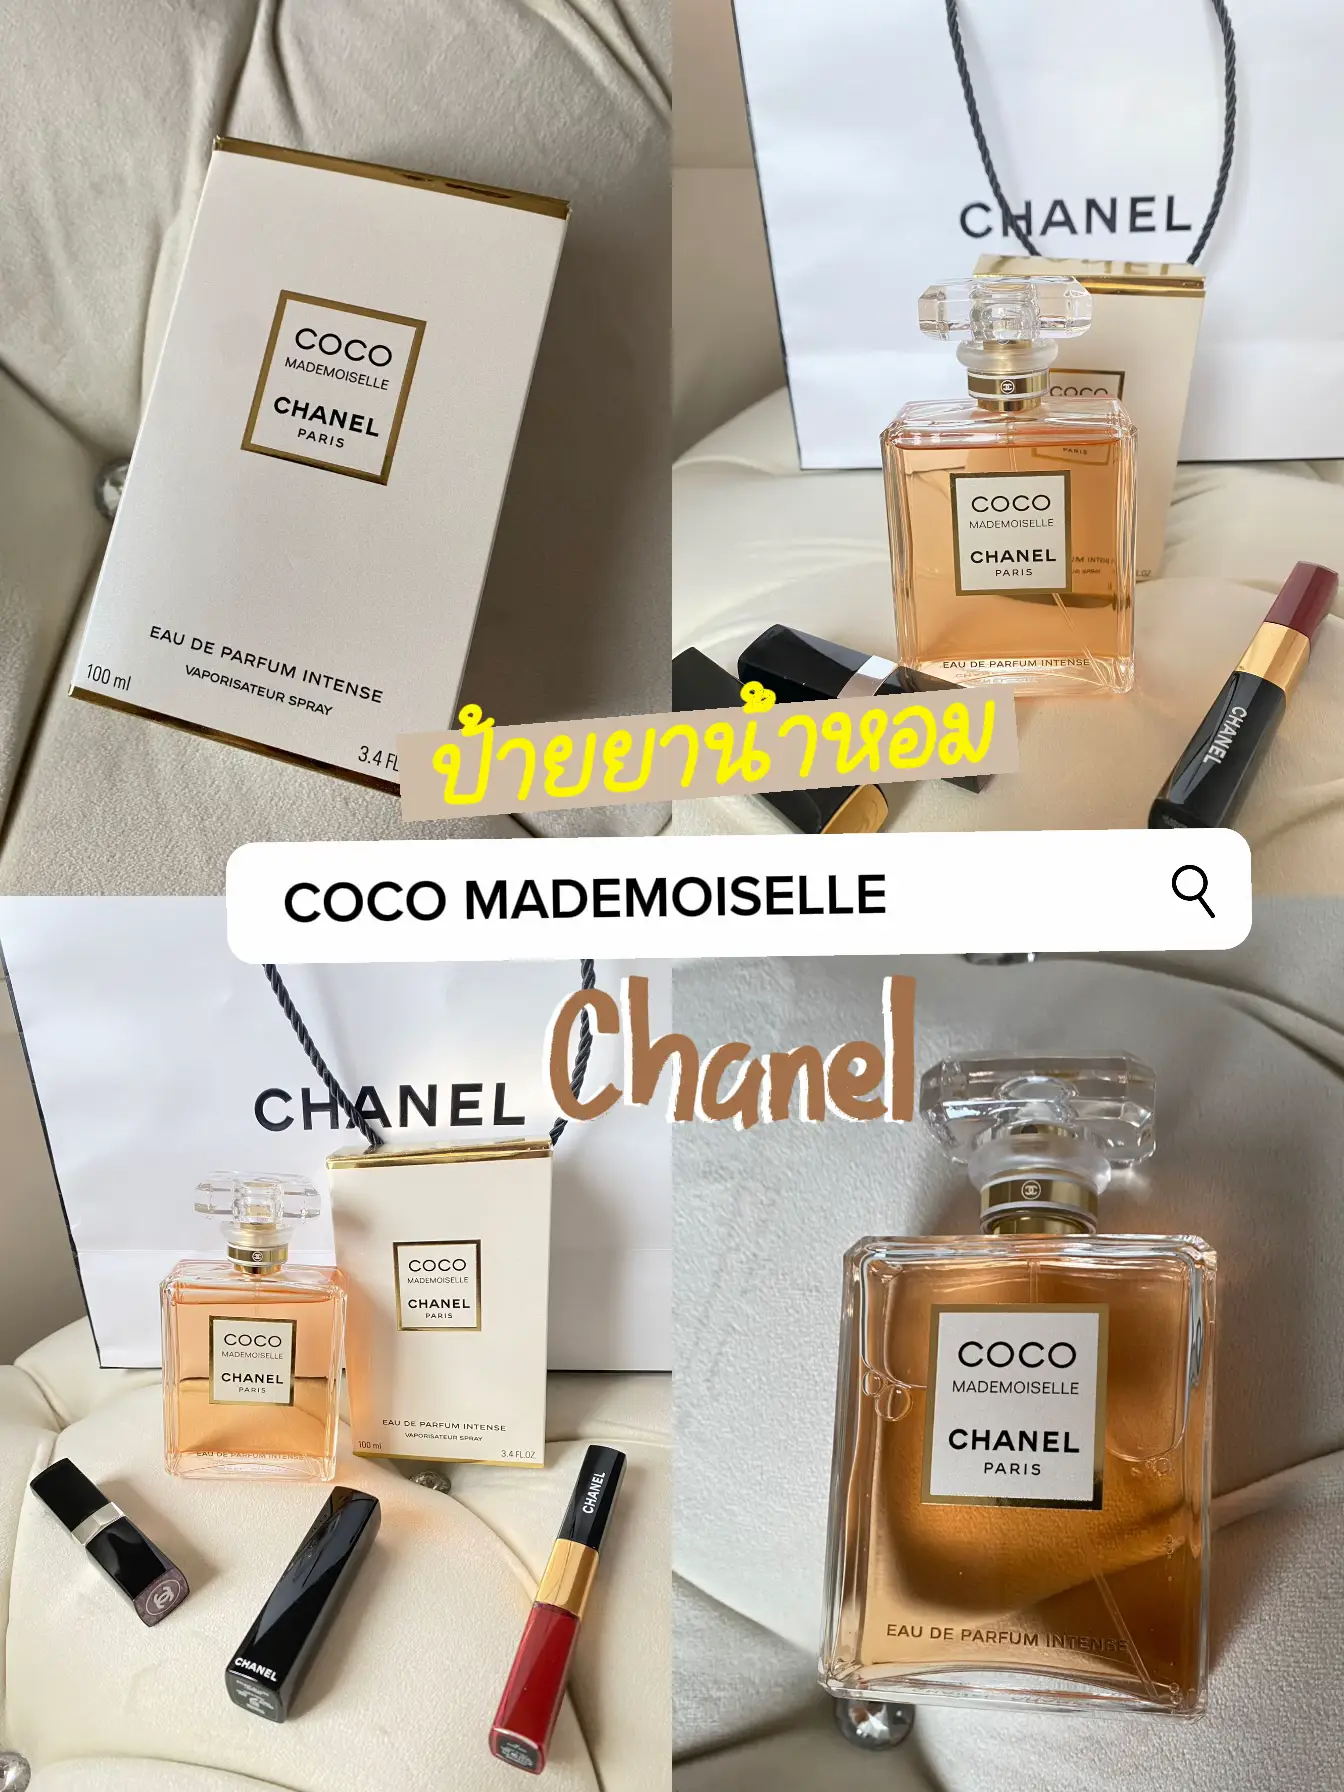 COCO Chanel Perfume, Gallery posted by 🐻Yammybear🐻